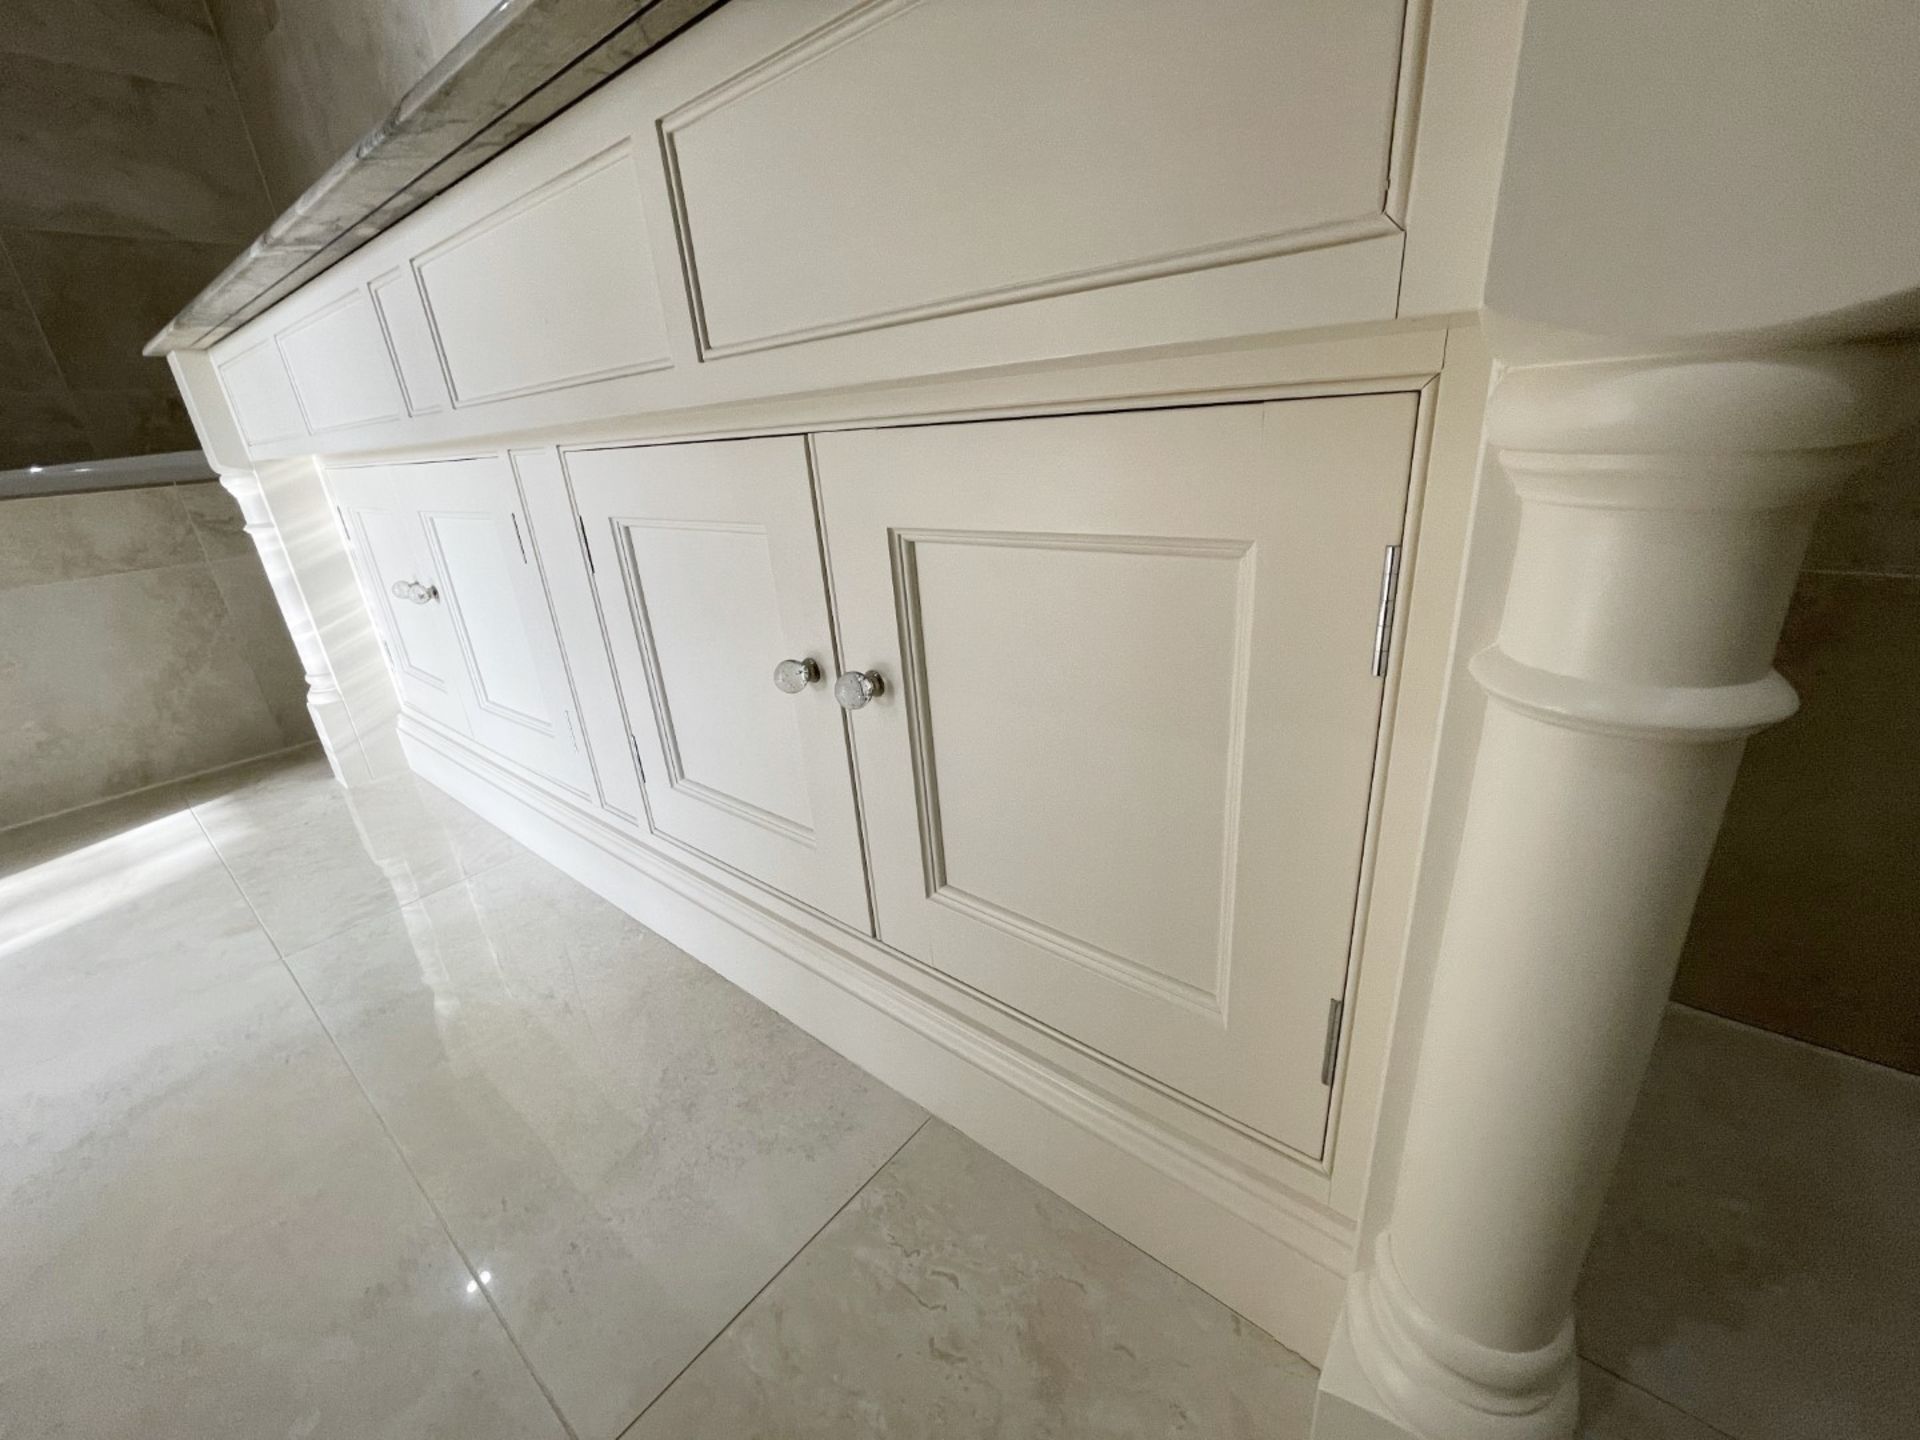 1 x Bespoke Marble-topped Solid Wood Double Vanity Unit with 2 x Villeroy & Boch Basins + Taps - Image 11 of 33